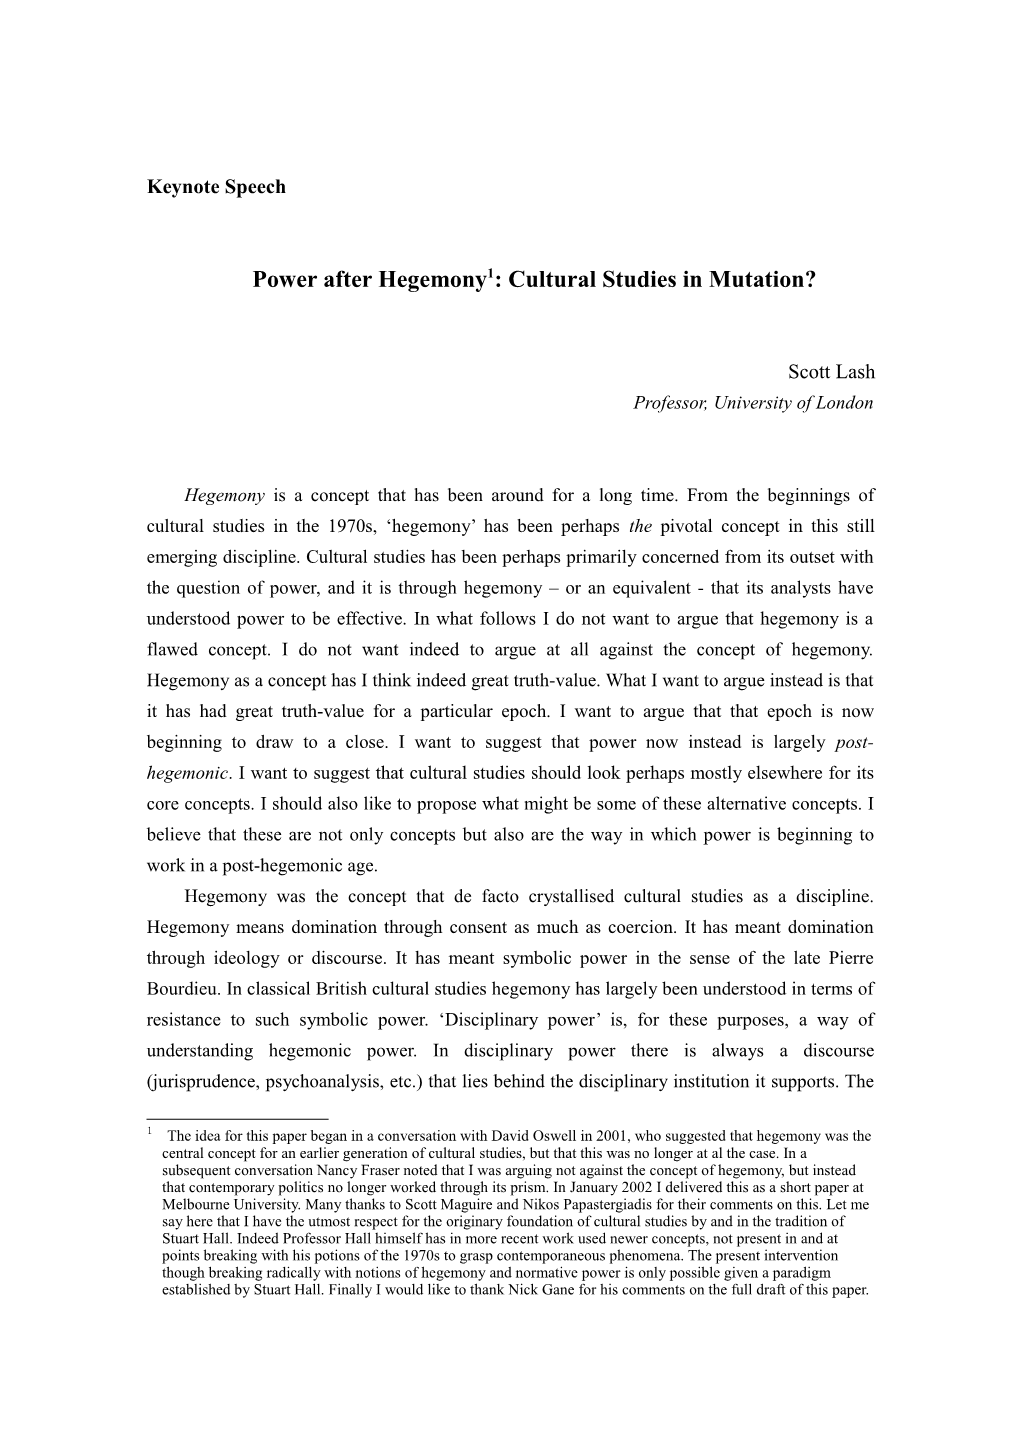 Power After Hegemony 1 : Cultural Studies in Mutation?